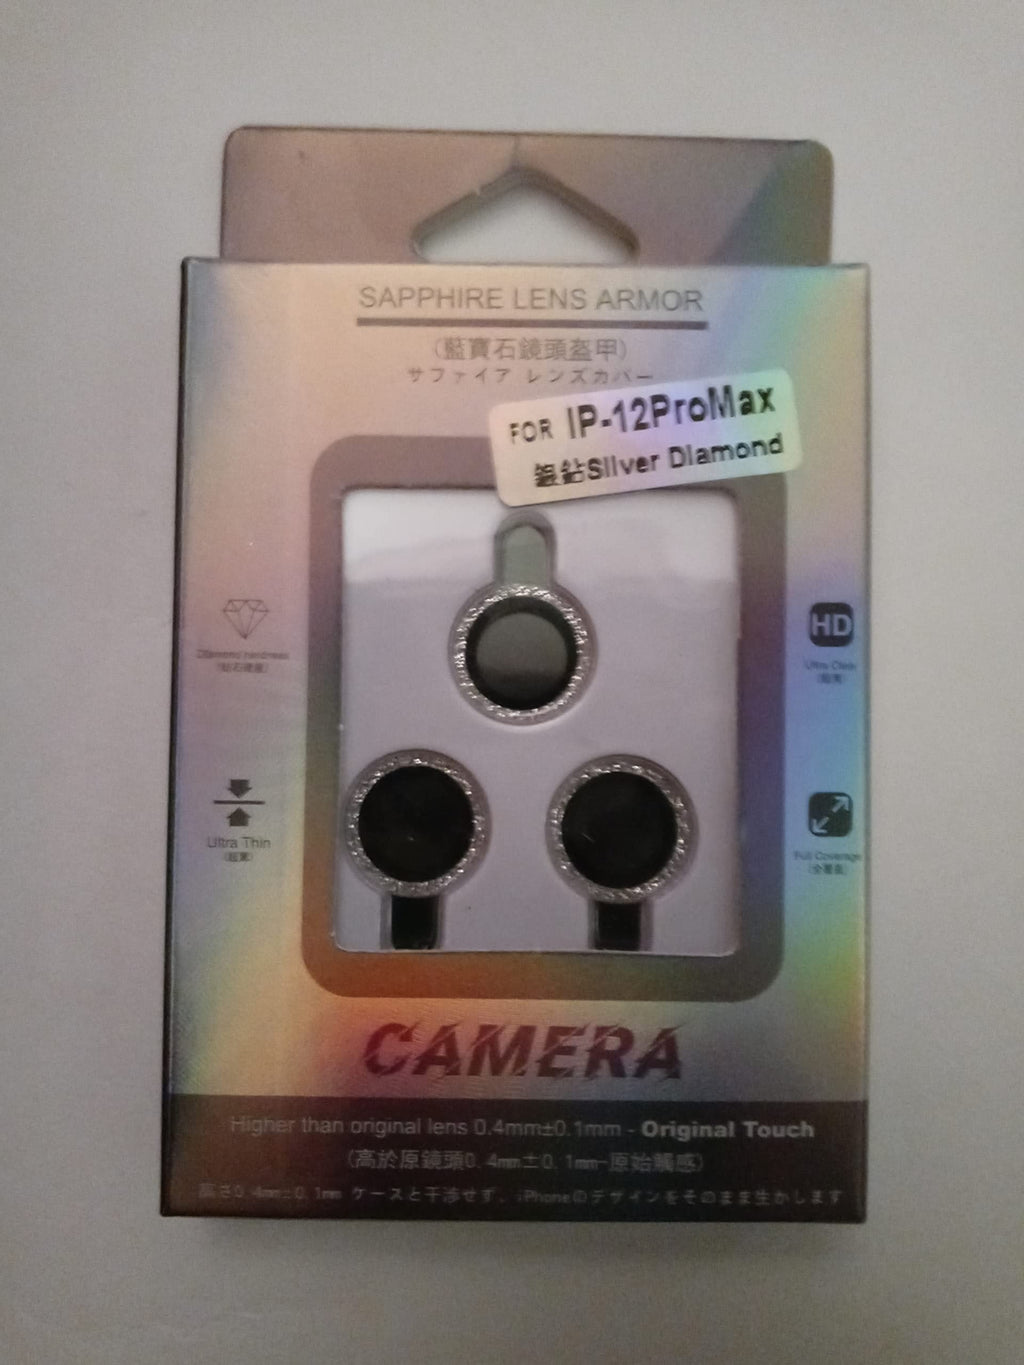  [AUSTRALIA] - Armor Camera Protect Lens from Scratches